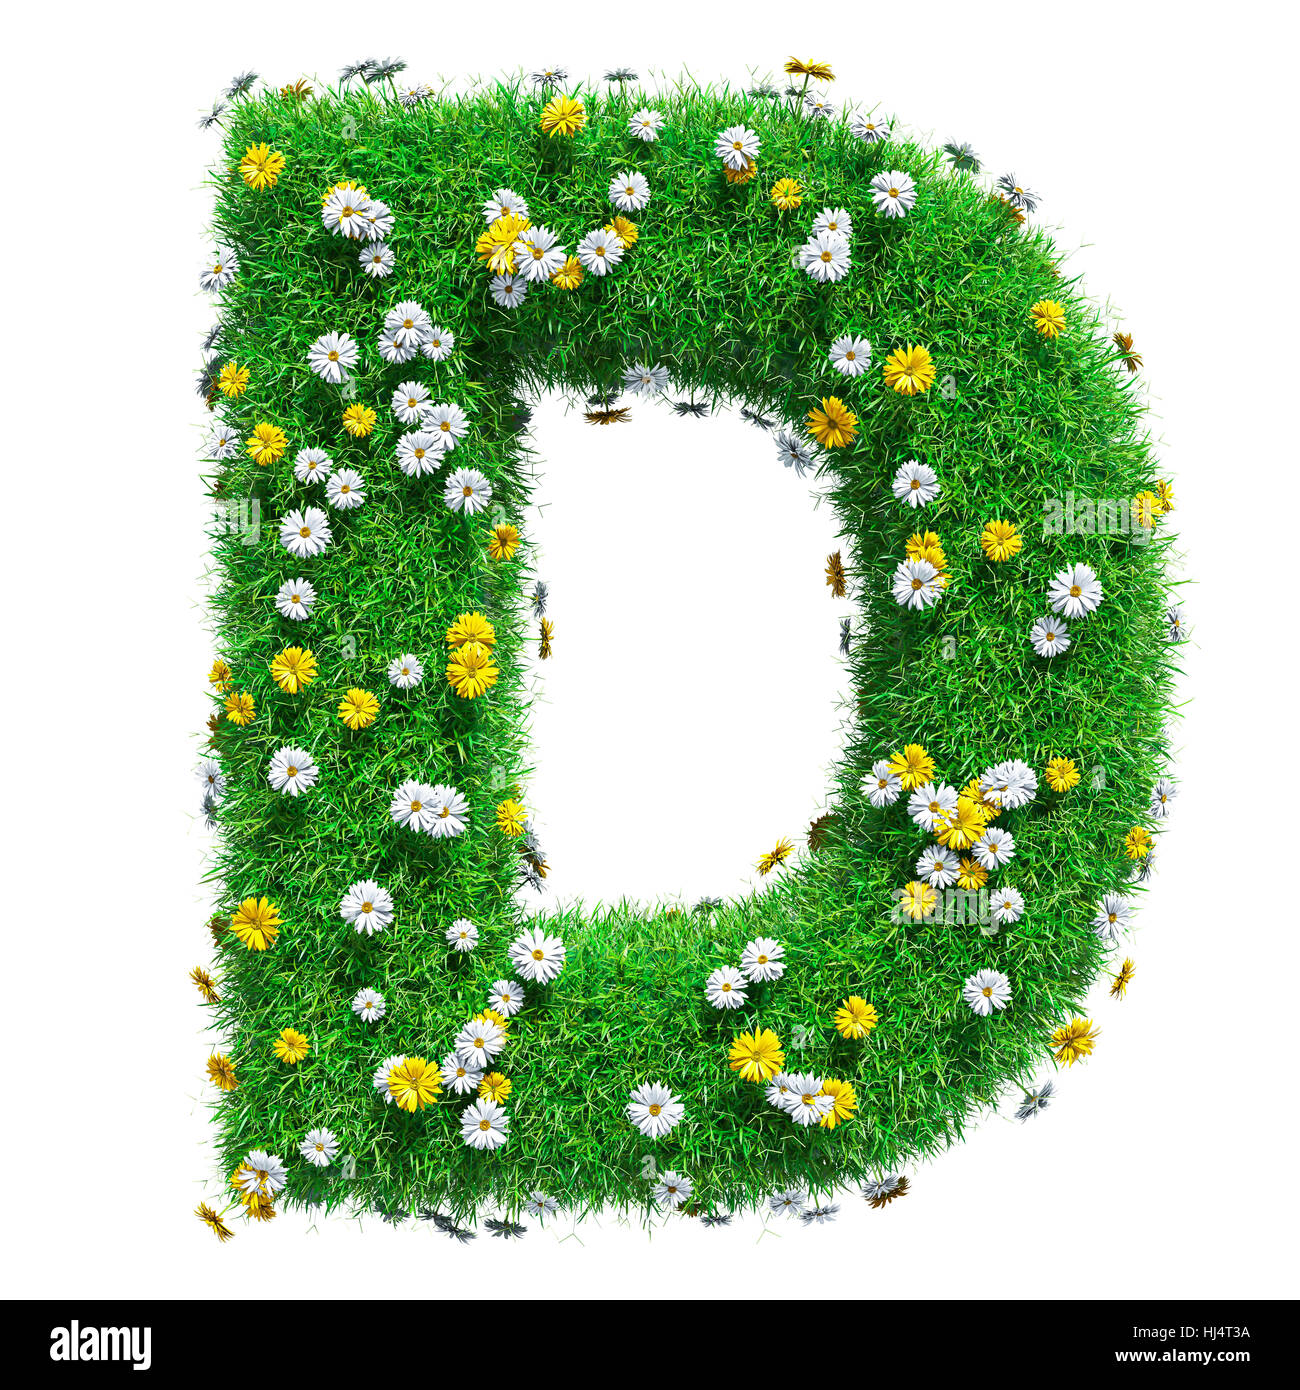 Letter D Of Green Grass And Flowers. Isolated On White Background. Font For Your Design. 3D Illustration Stock Photo